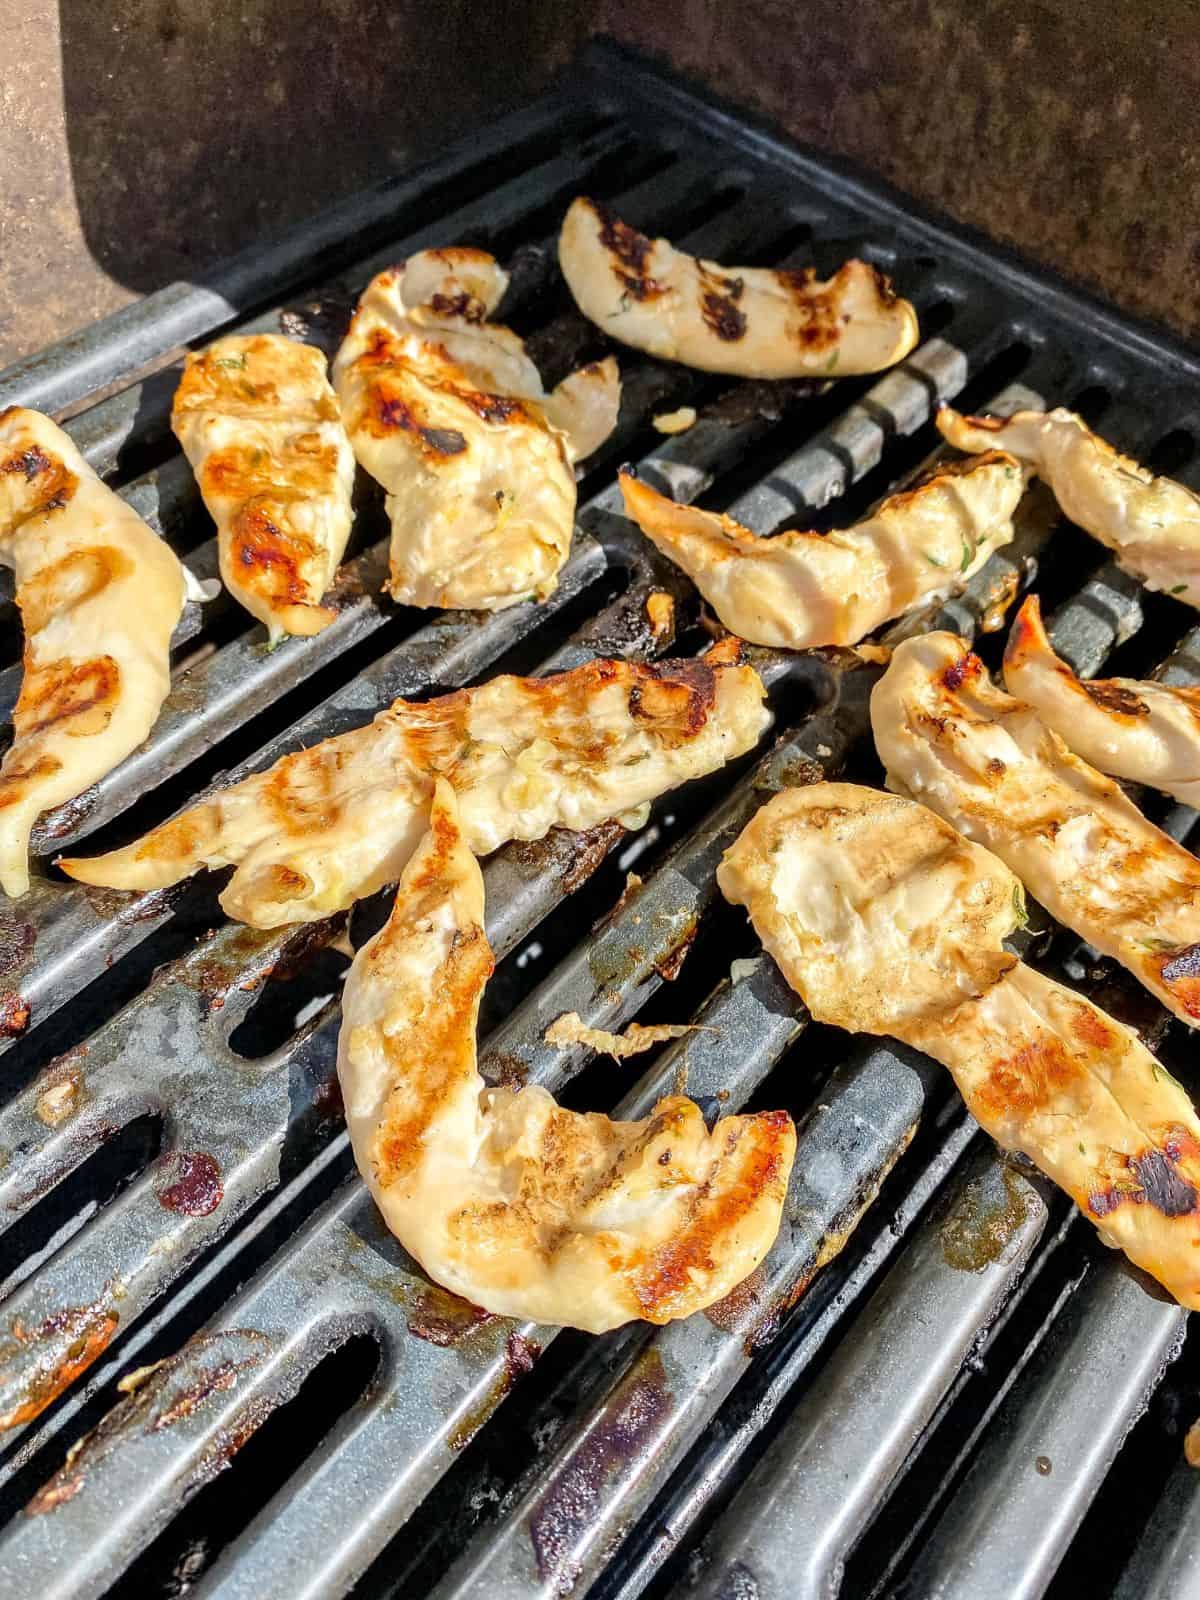 pieces of chicken on a BBQ grill.